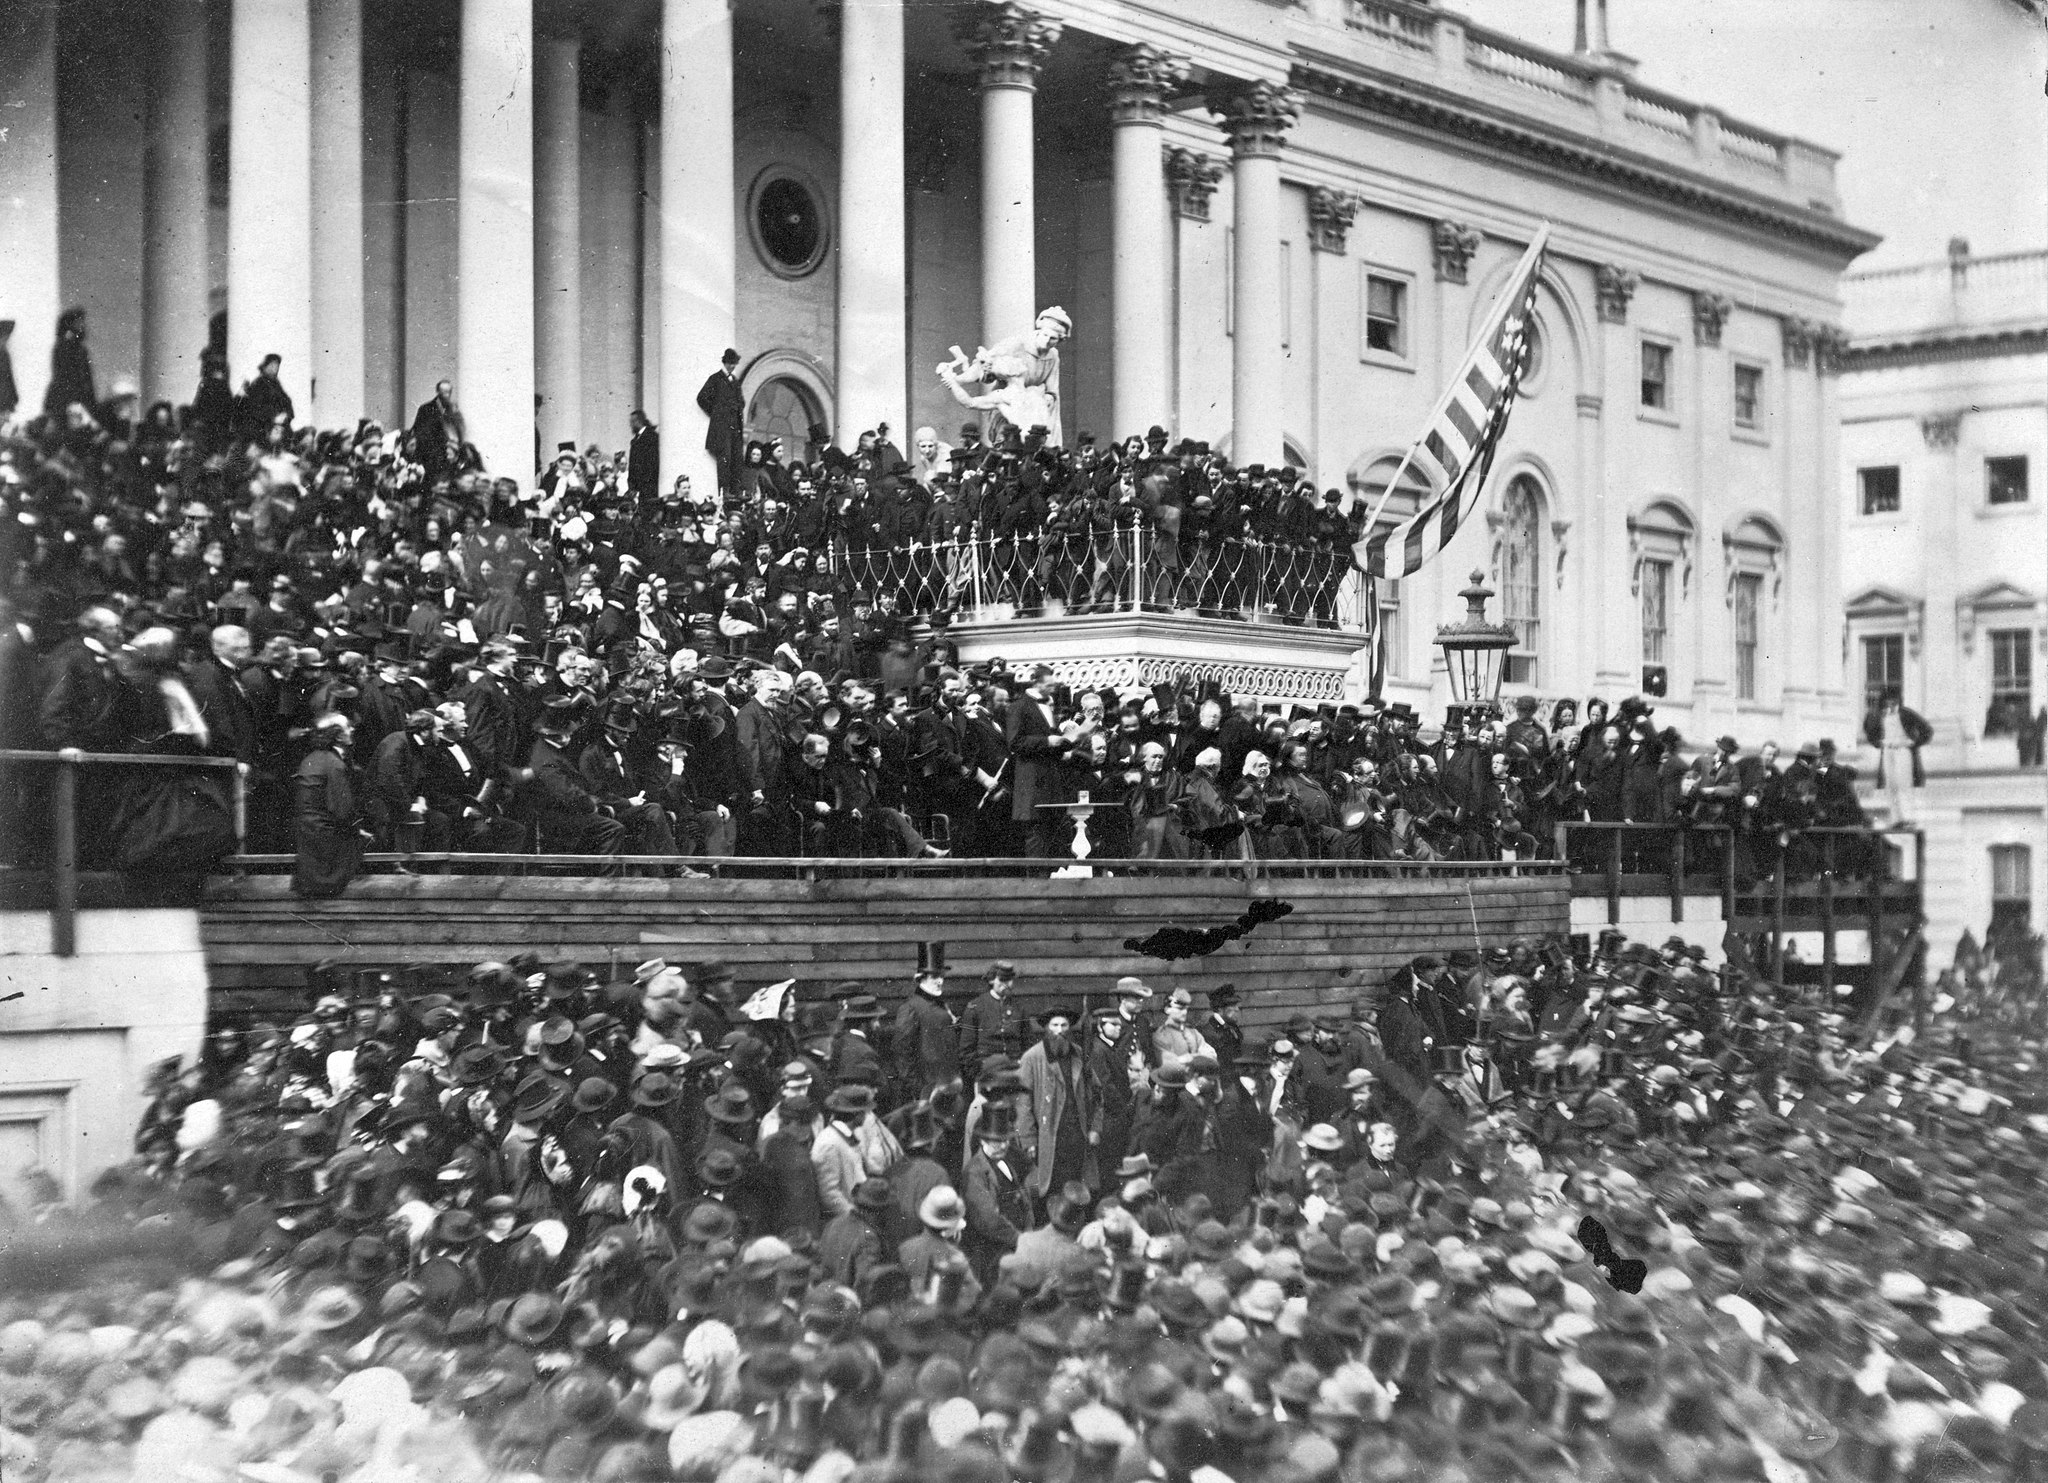 An image from Lincoln's second inaugural address